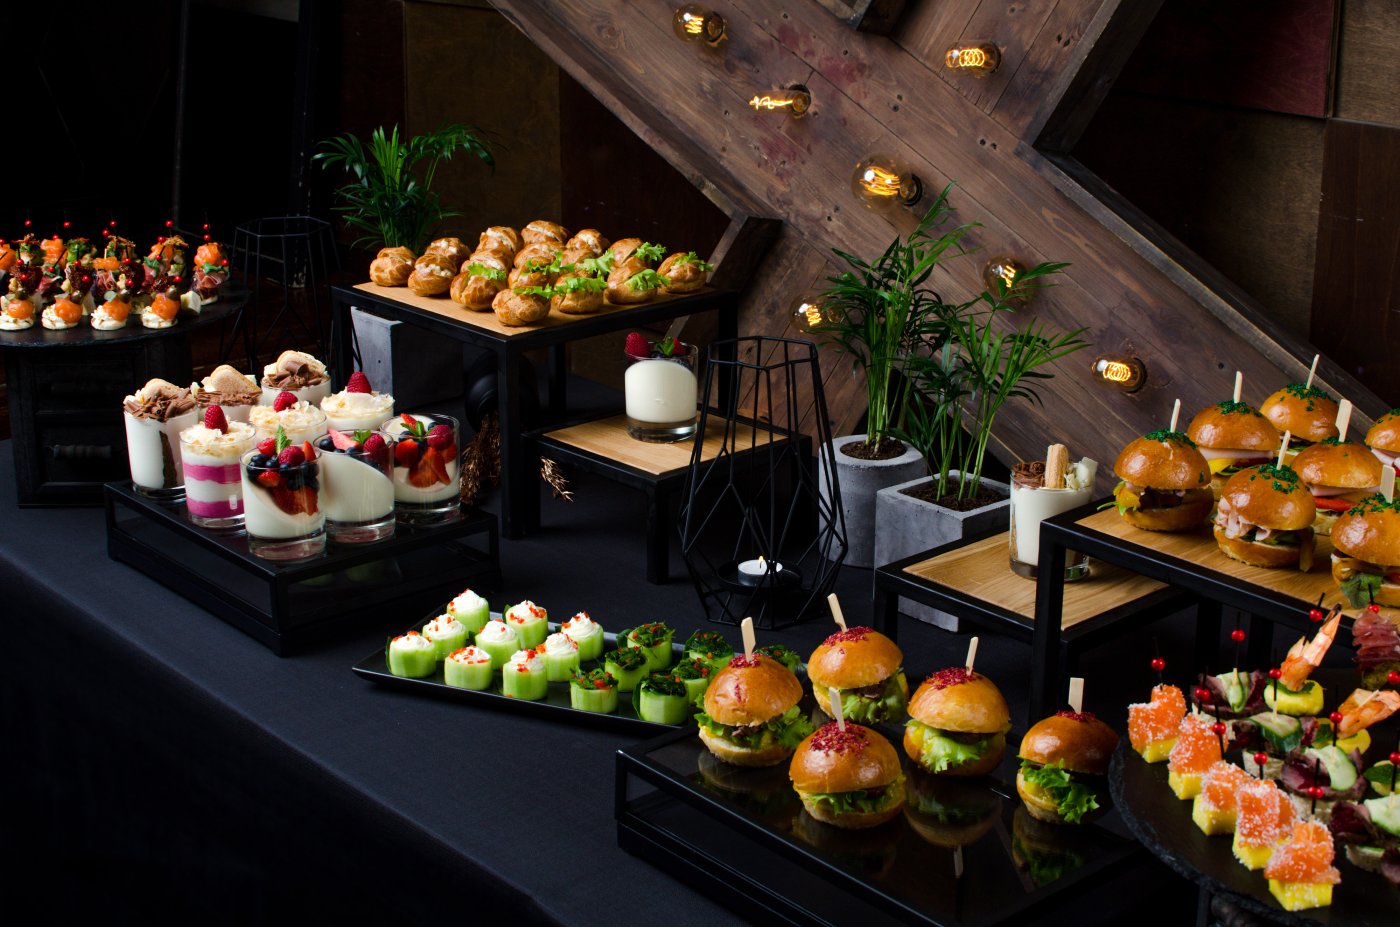 A dark backdrop with a selection of glossy black plates containing various appetisers including mini burgers, deserts and salads